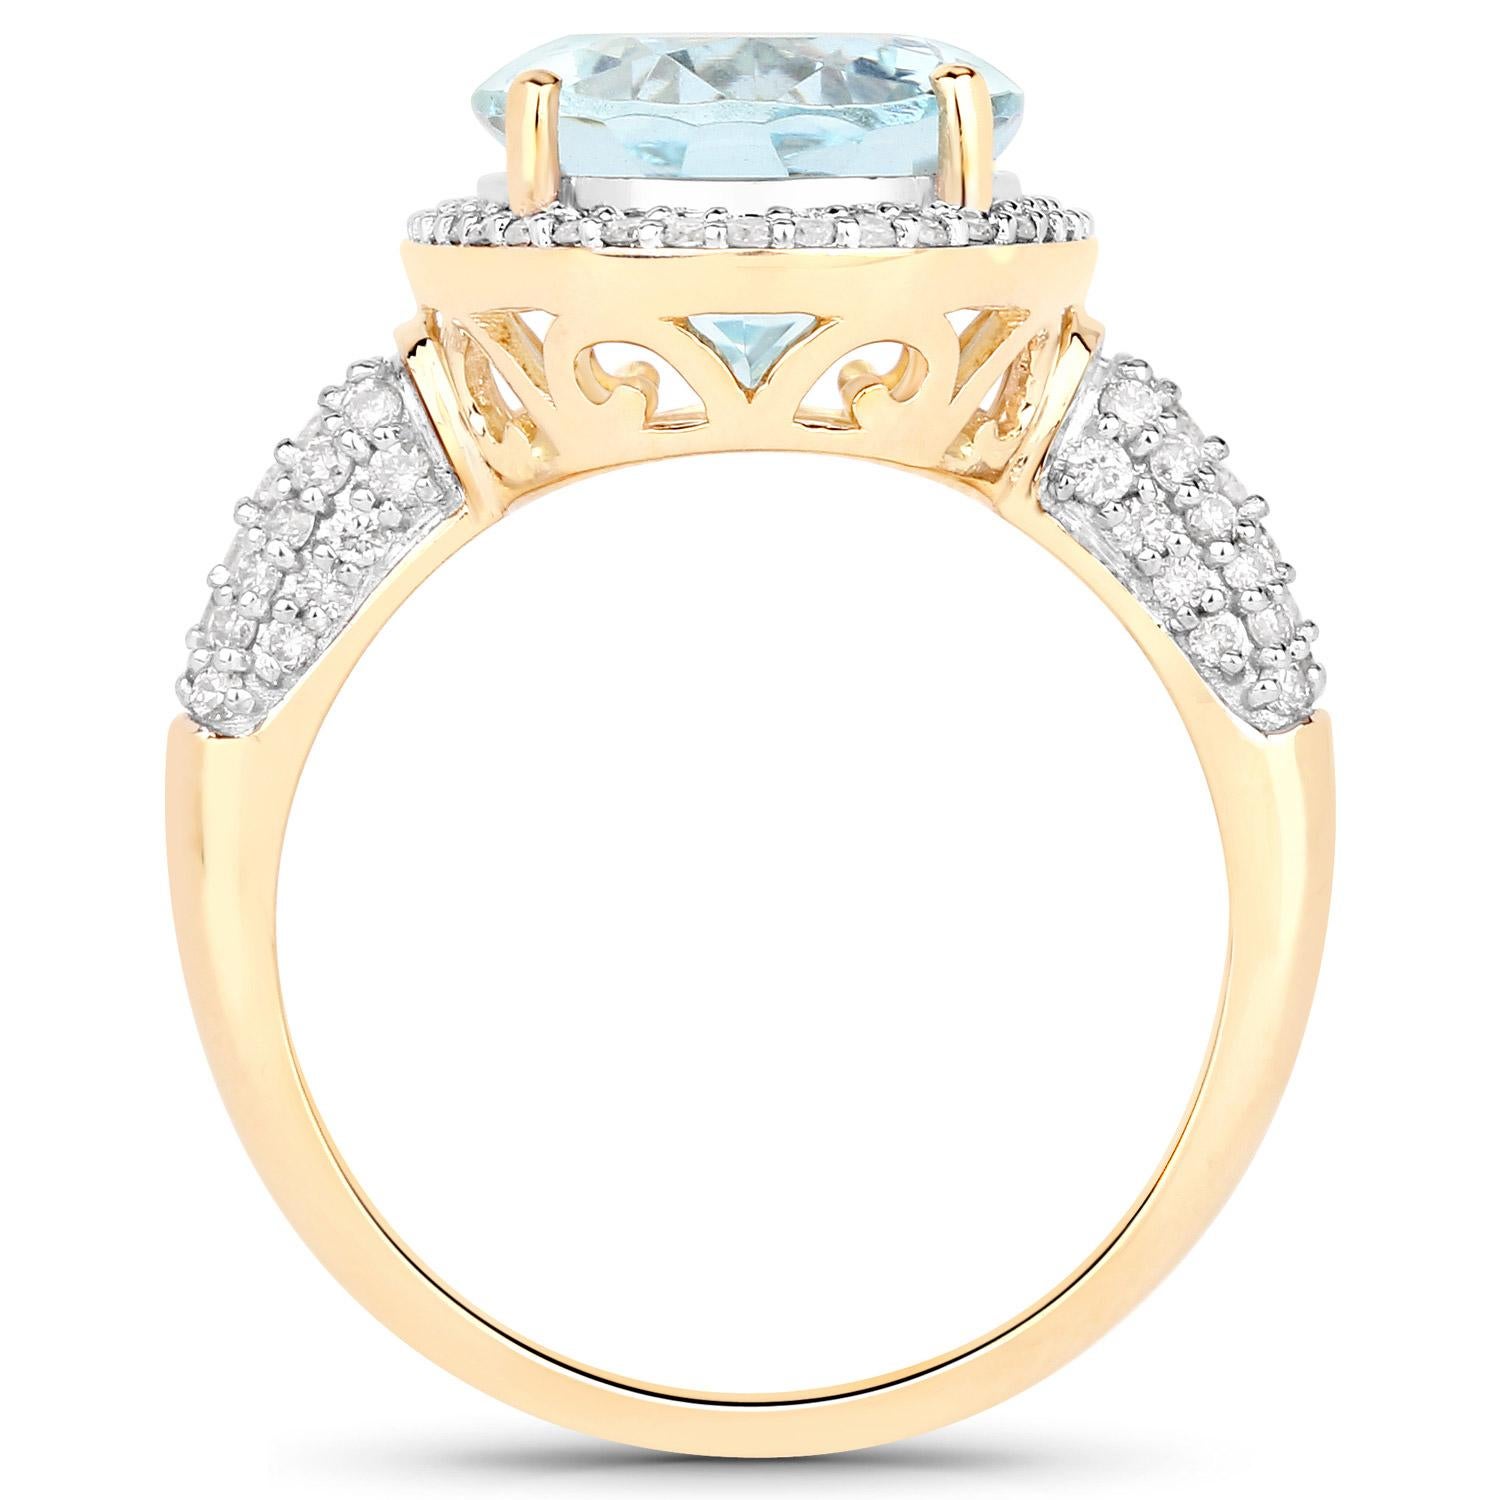 Aquamarine Cocktail Ring Diamond Setting 5.45 Carats 14K Yellow Gold In Excellent Condition For Sale In Laguna Niguel, CA